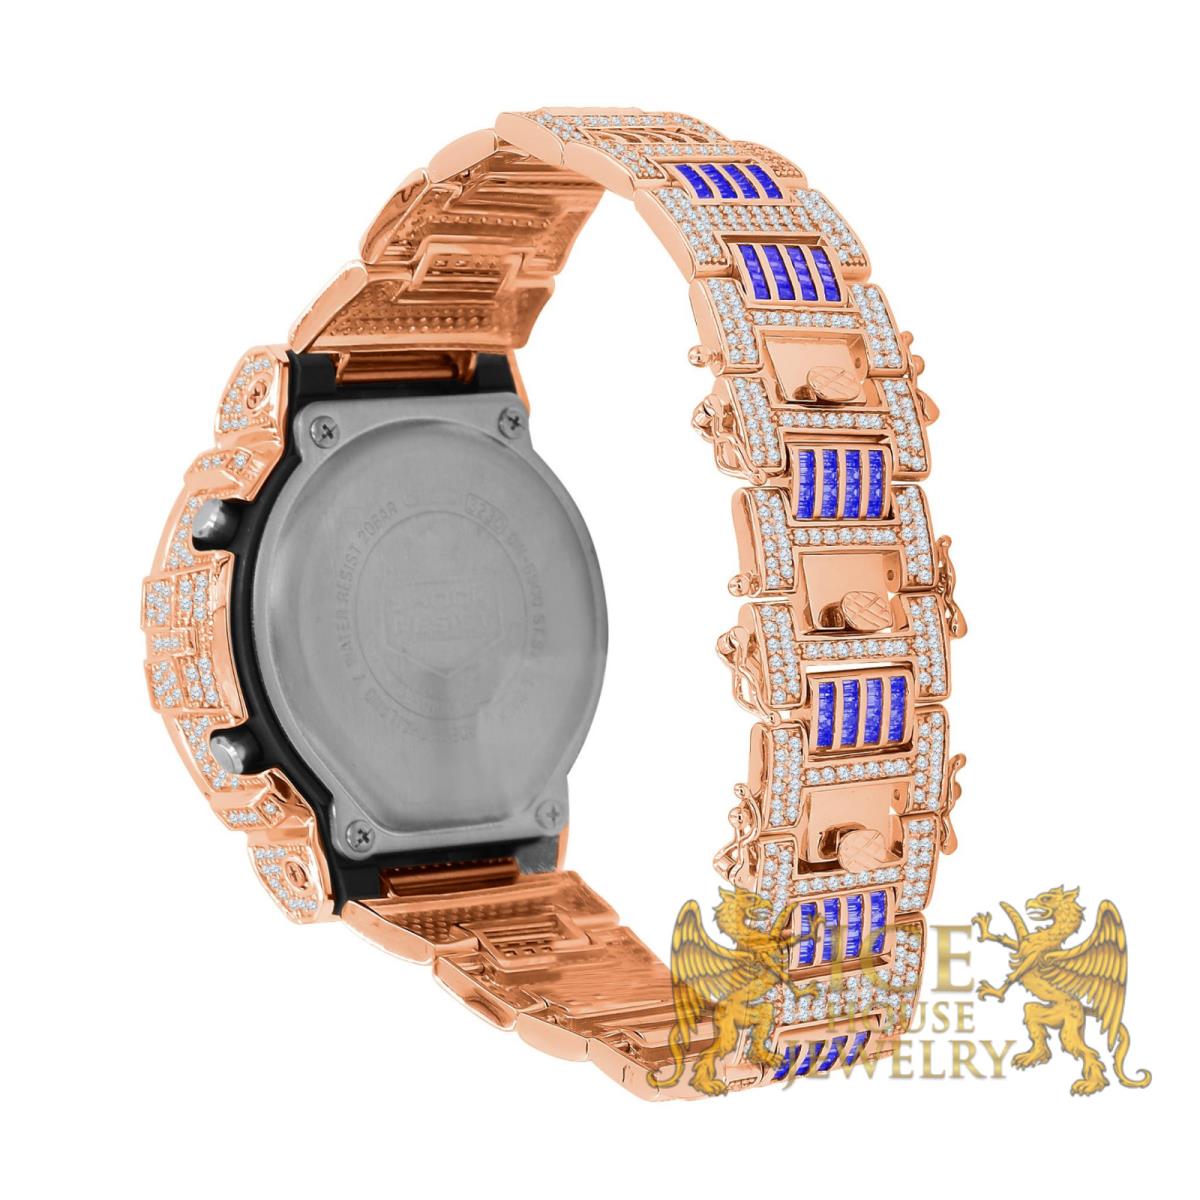 Icy Blue Sapphire Baguettes On Rose Gold Casio G-shock DW-6900 Watch